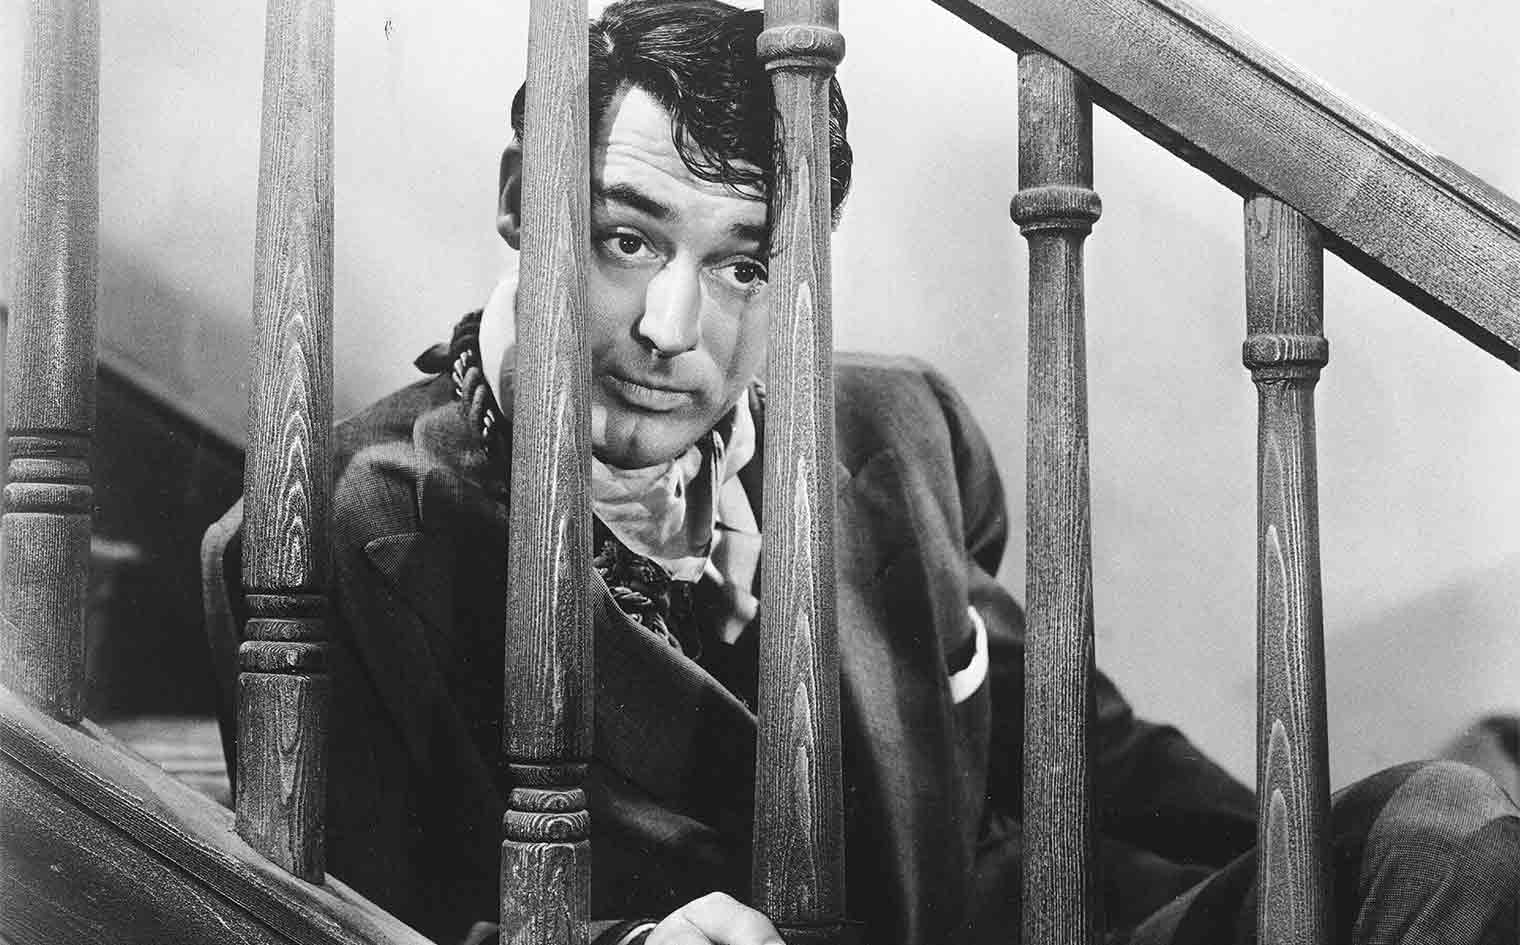 Losing My Religion: Arsenic and Old Lace — Talk Film Society